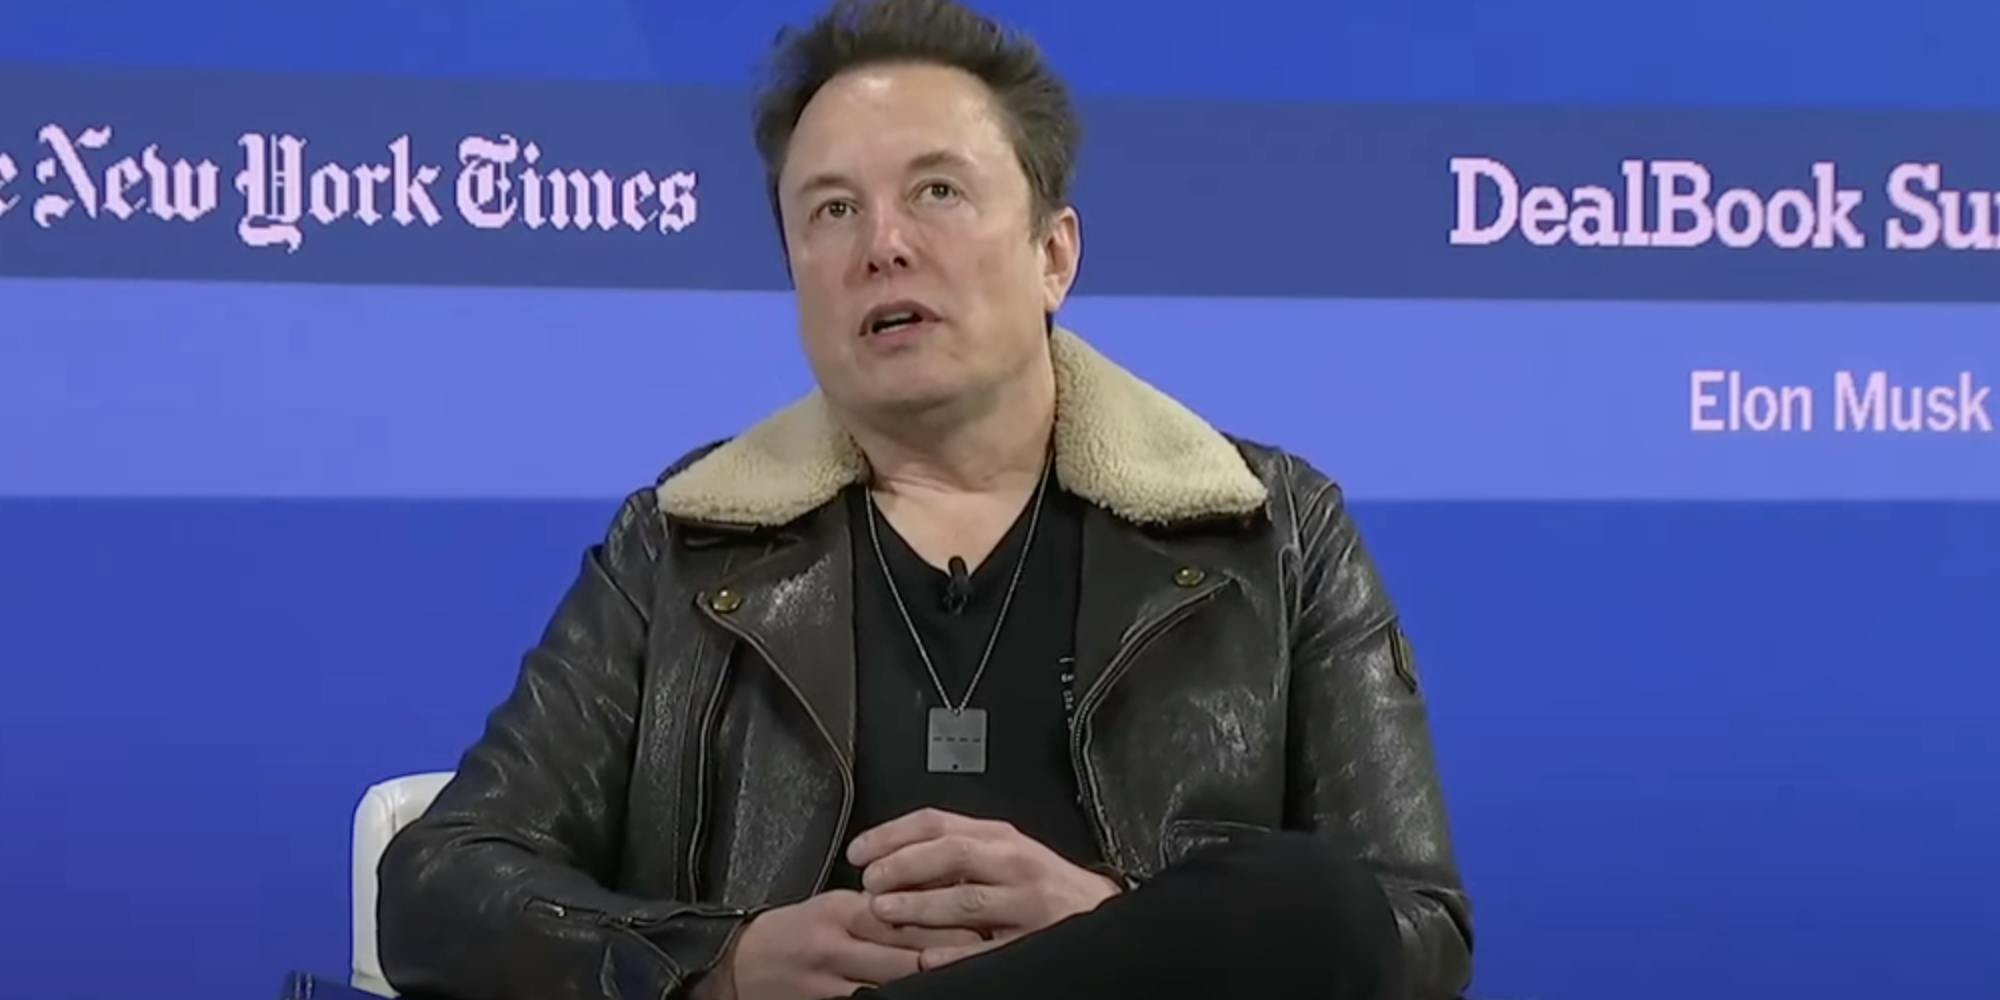 'Massive quantities': Elon Musk's truly bizarre prompts speculation about how much ketamine he was on